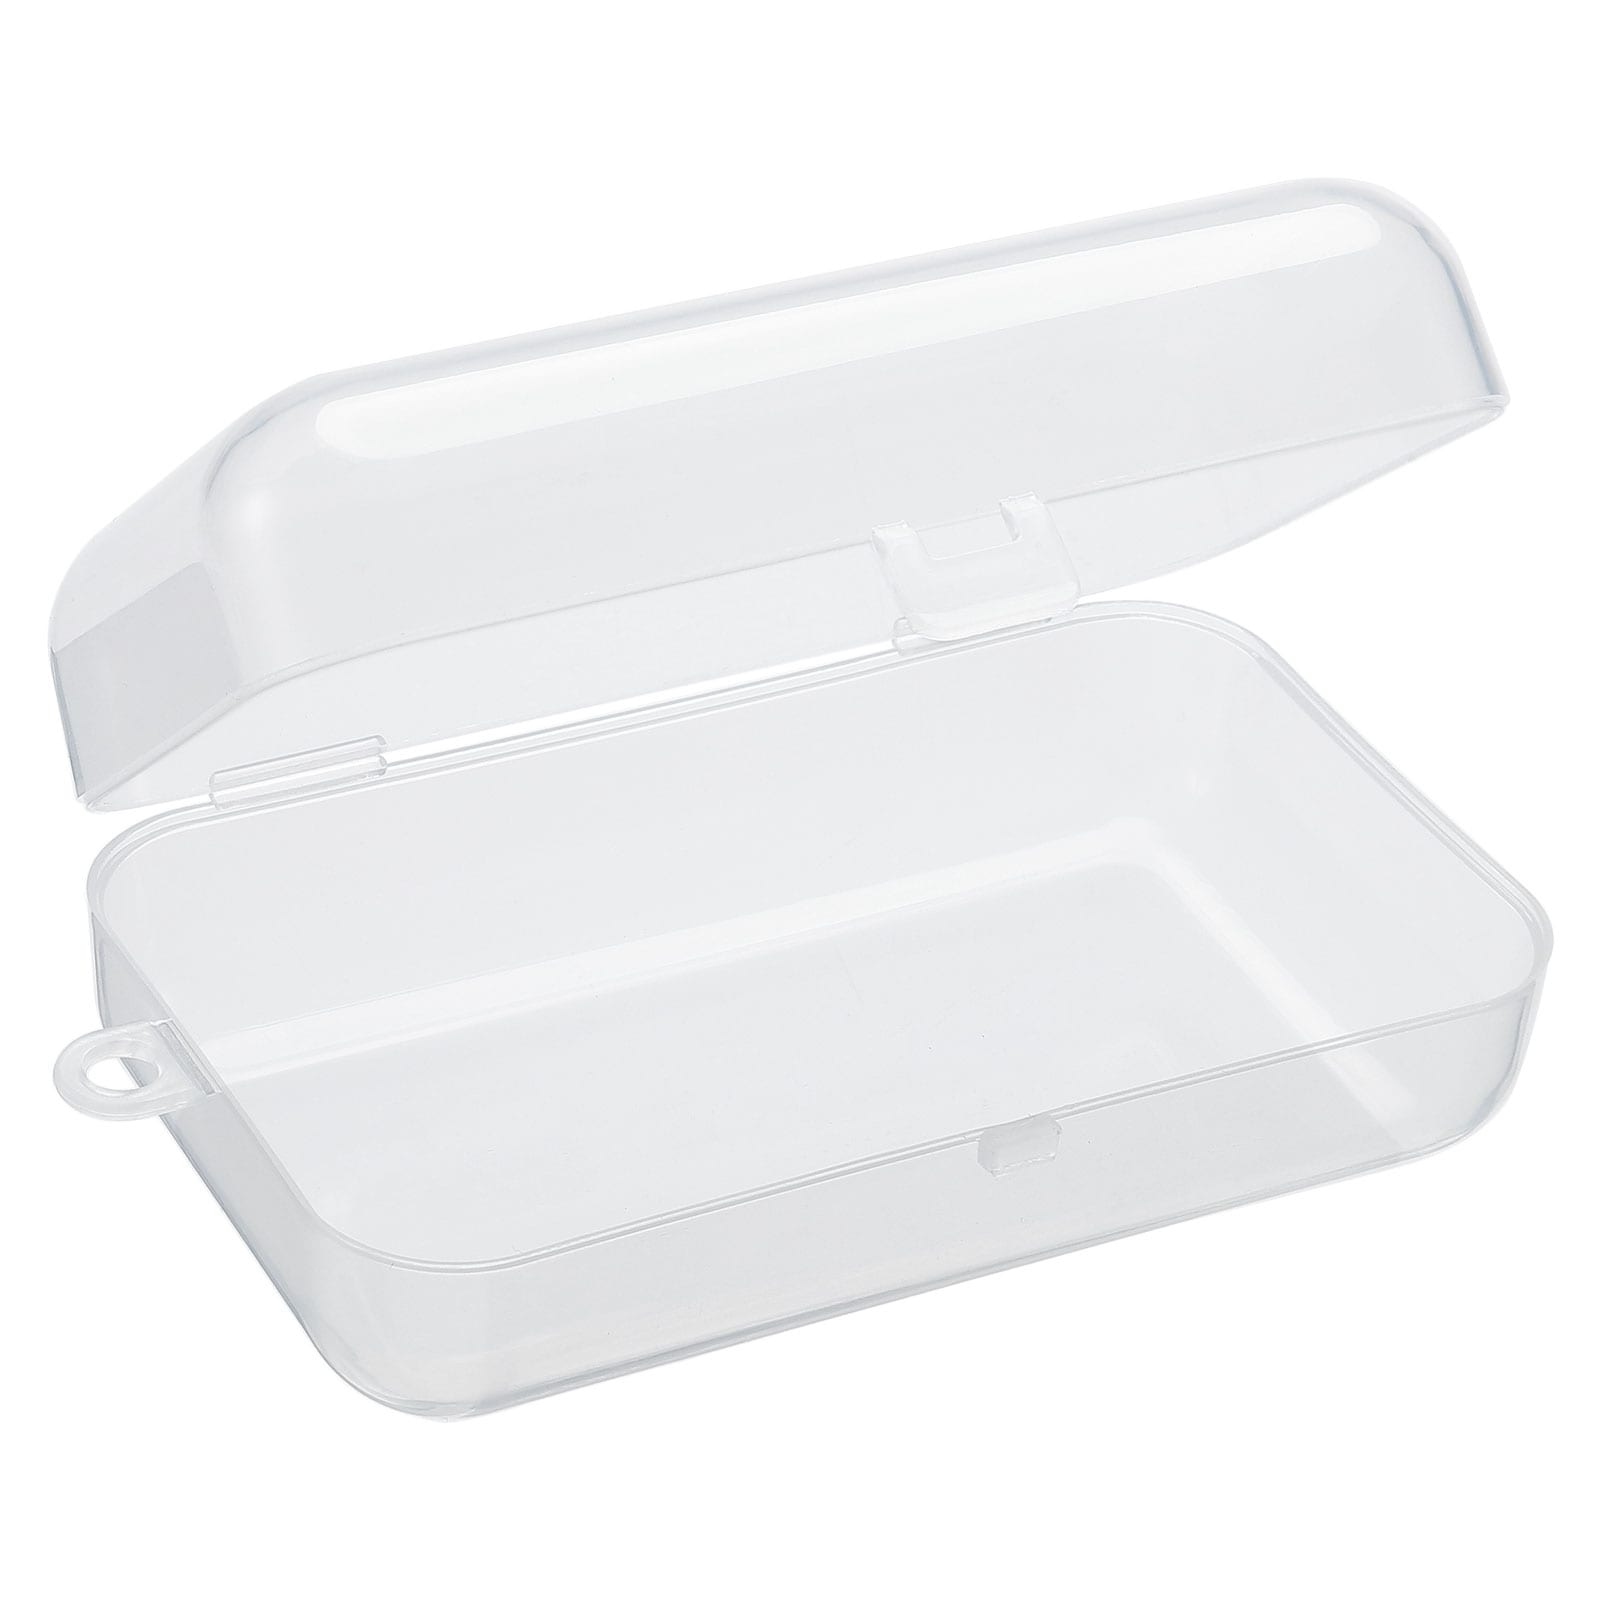 https://ak1.ostkcdn.com/images/products/is/images/direct/b5bd0b82c0f847e925d0ce9afbe8b329cf01200e/Storage-Containers-with-Hinged-Lid-Plastic-Rectangle-Box-for-Art-Craft.jpg